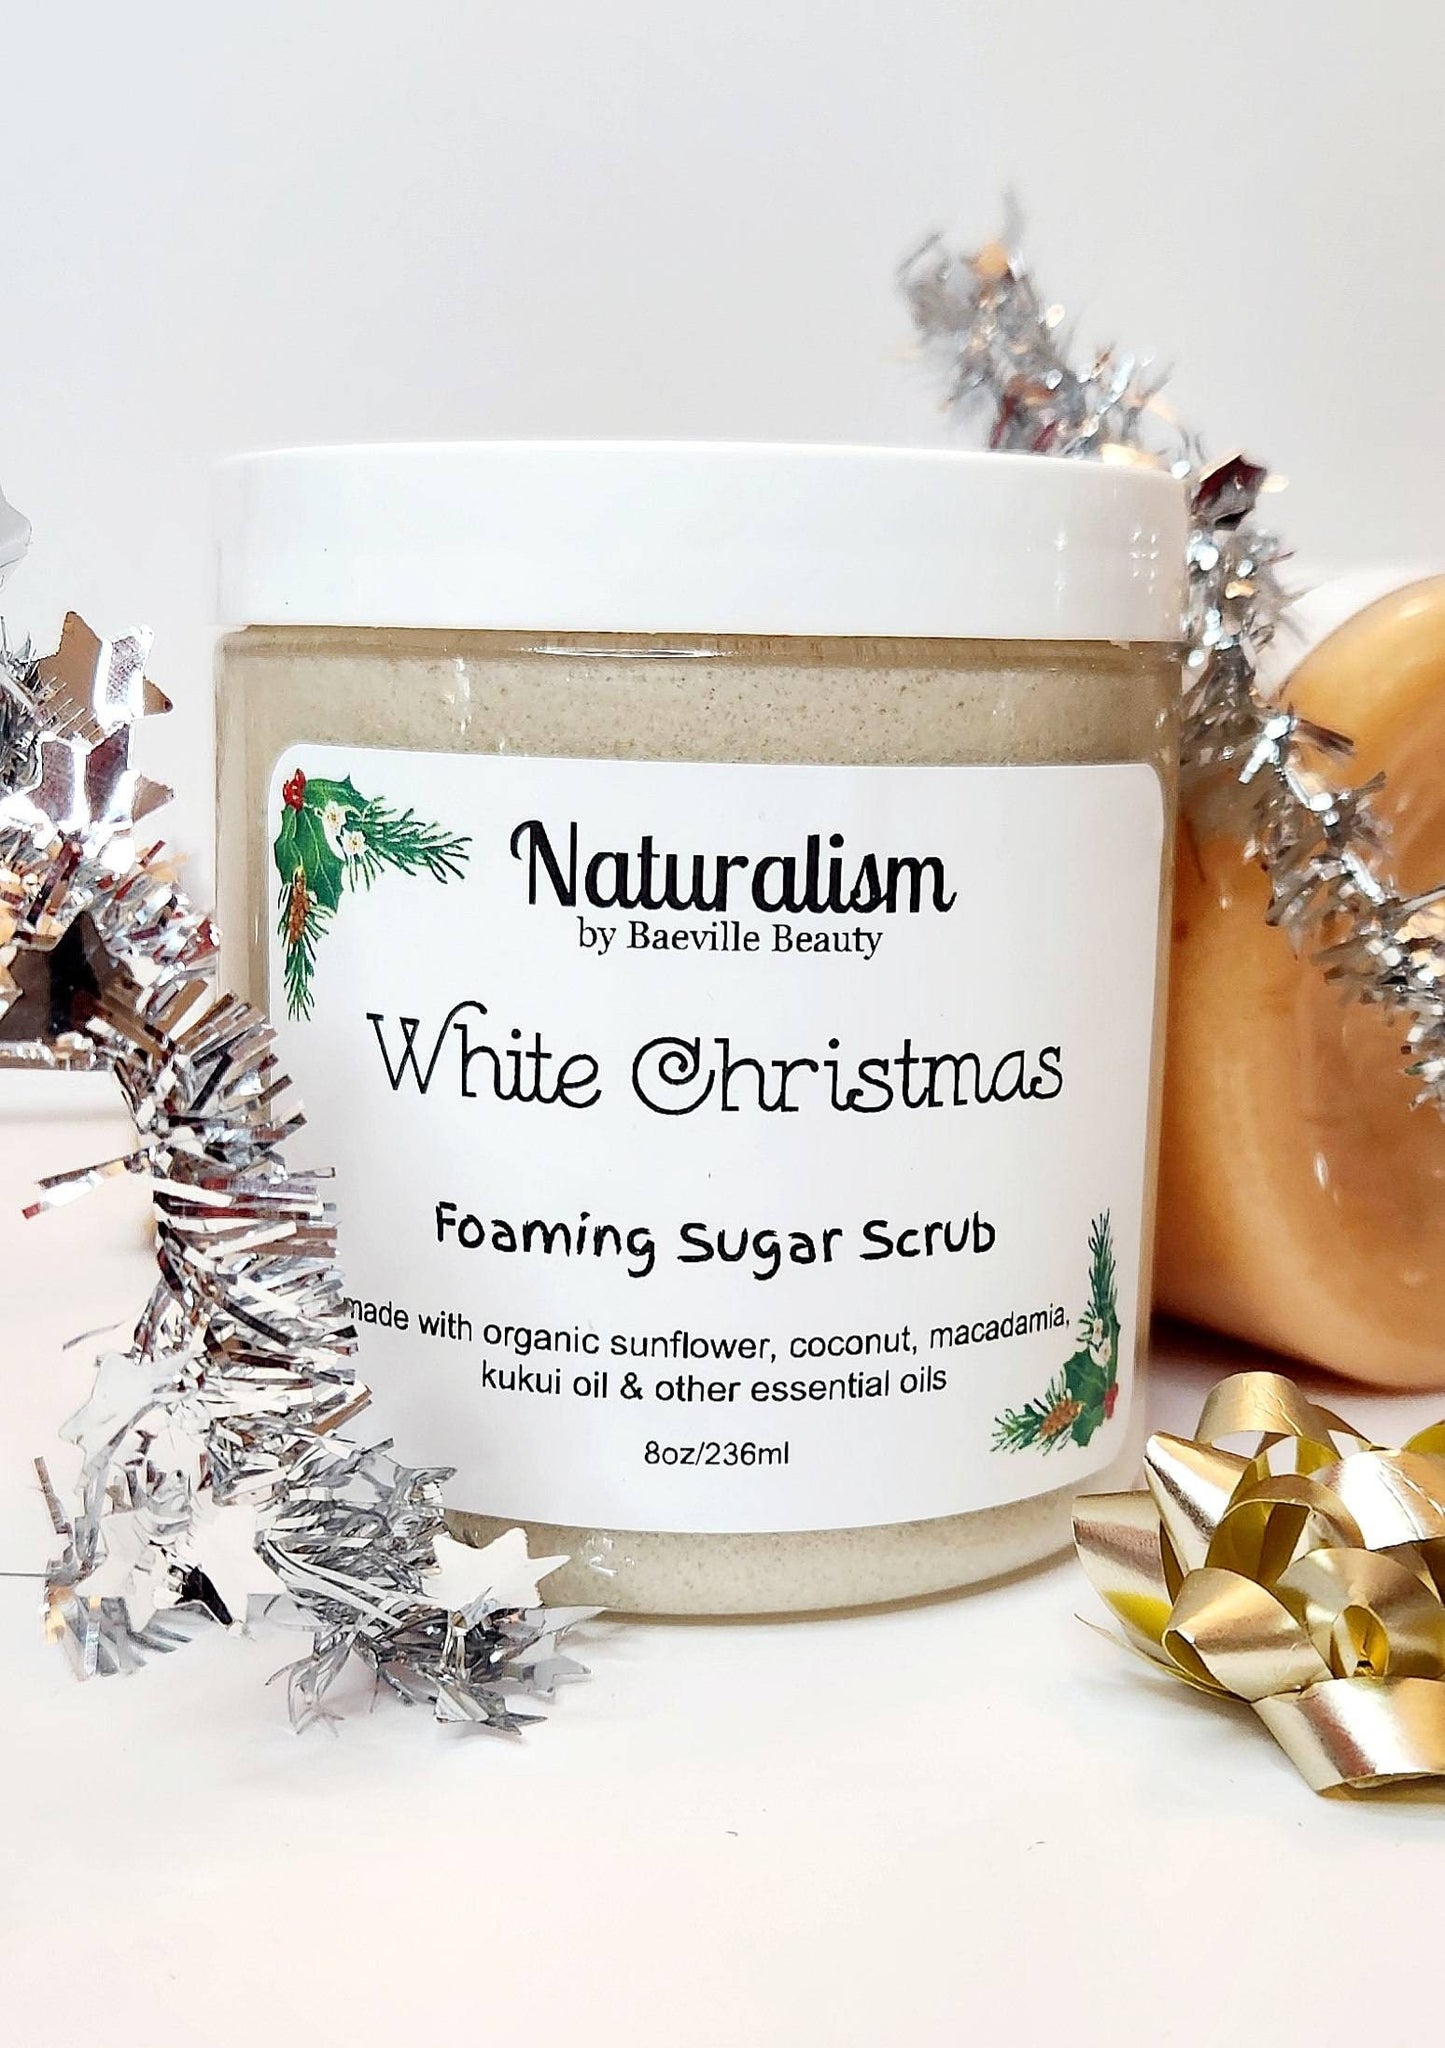 Holiday Scents Natural Organic Shea Butter Foaming Body Scrub & Soap|Face Body Scrub|Exfoliating| Moisturizing|Limited Edition